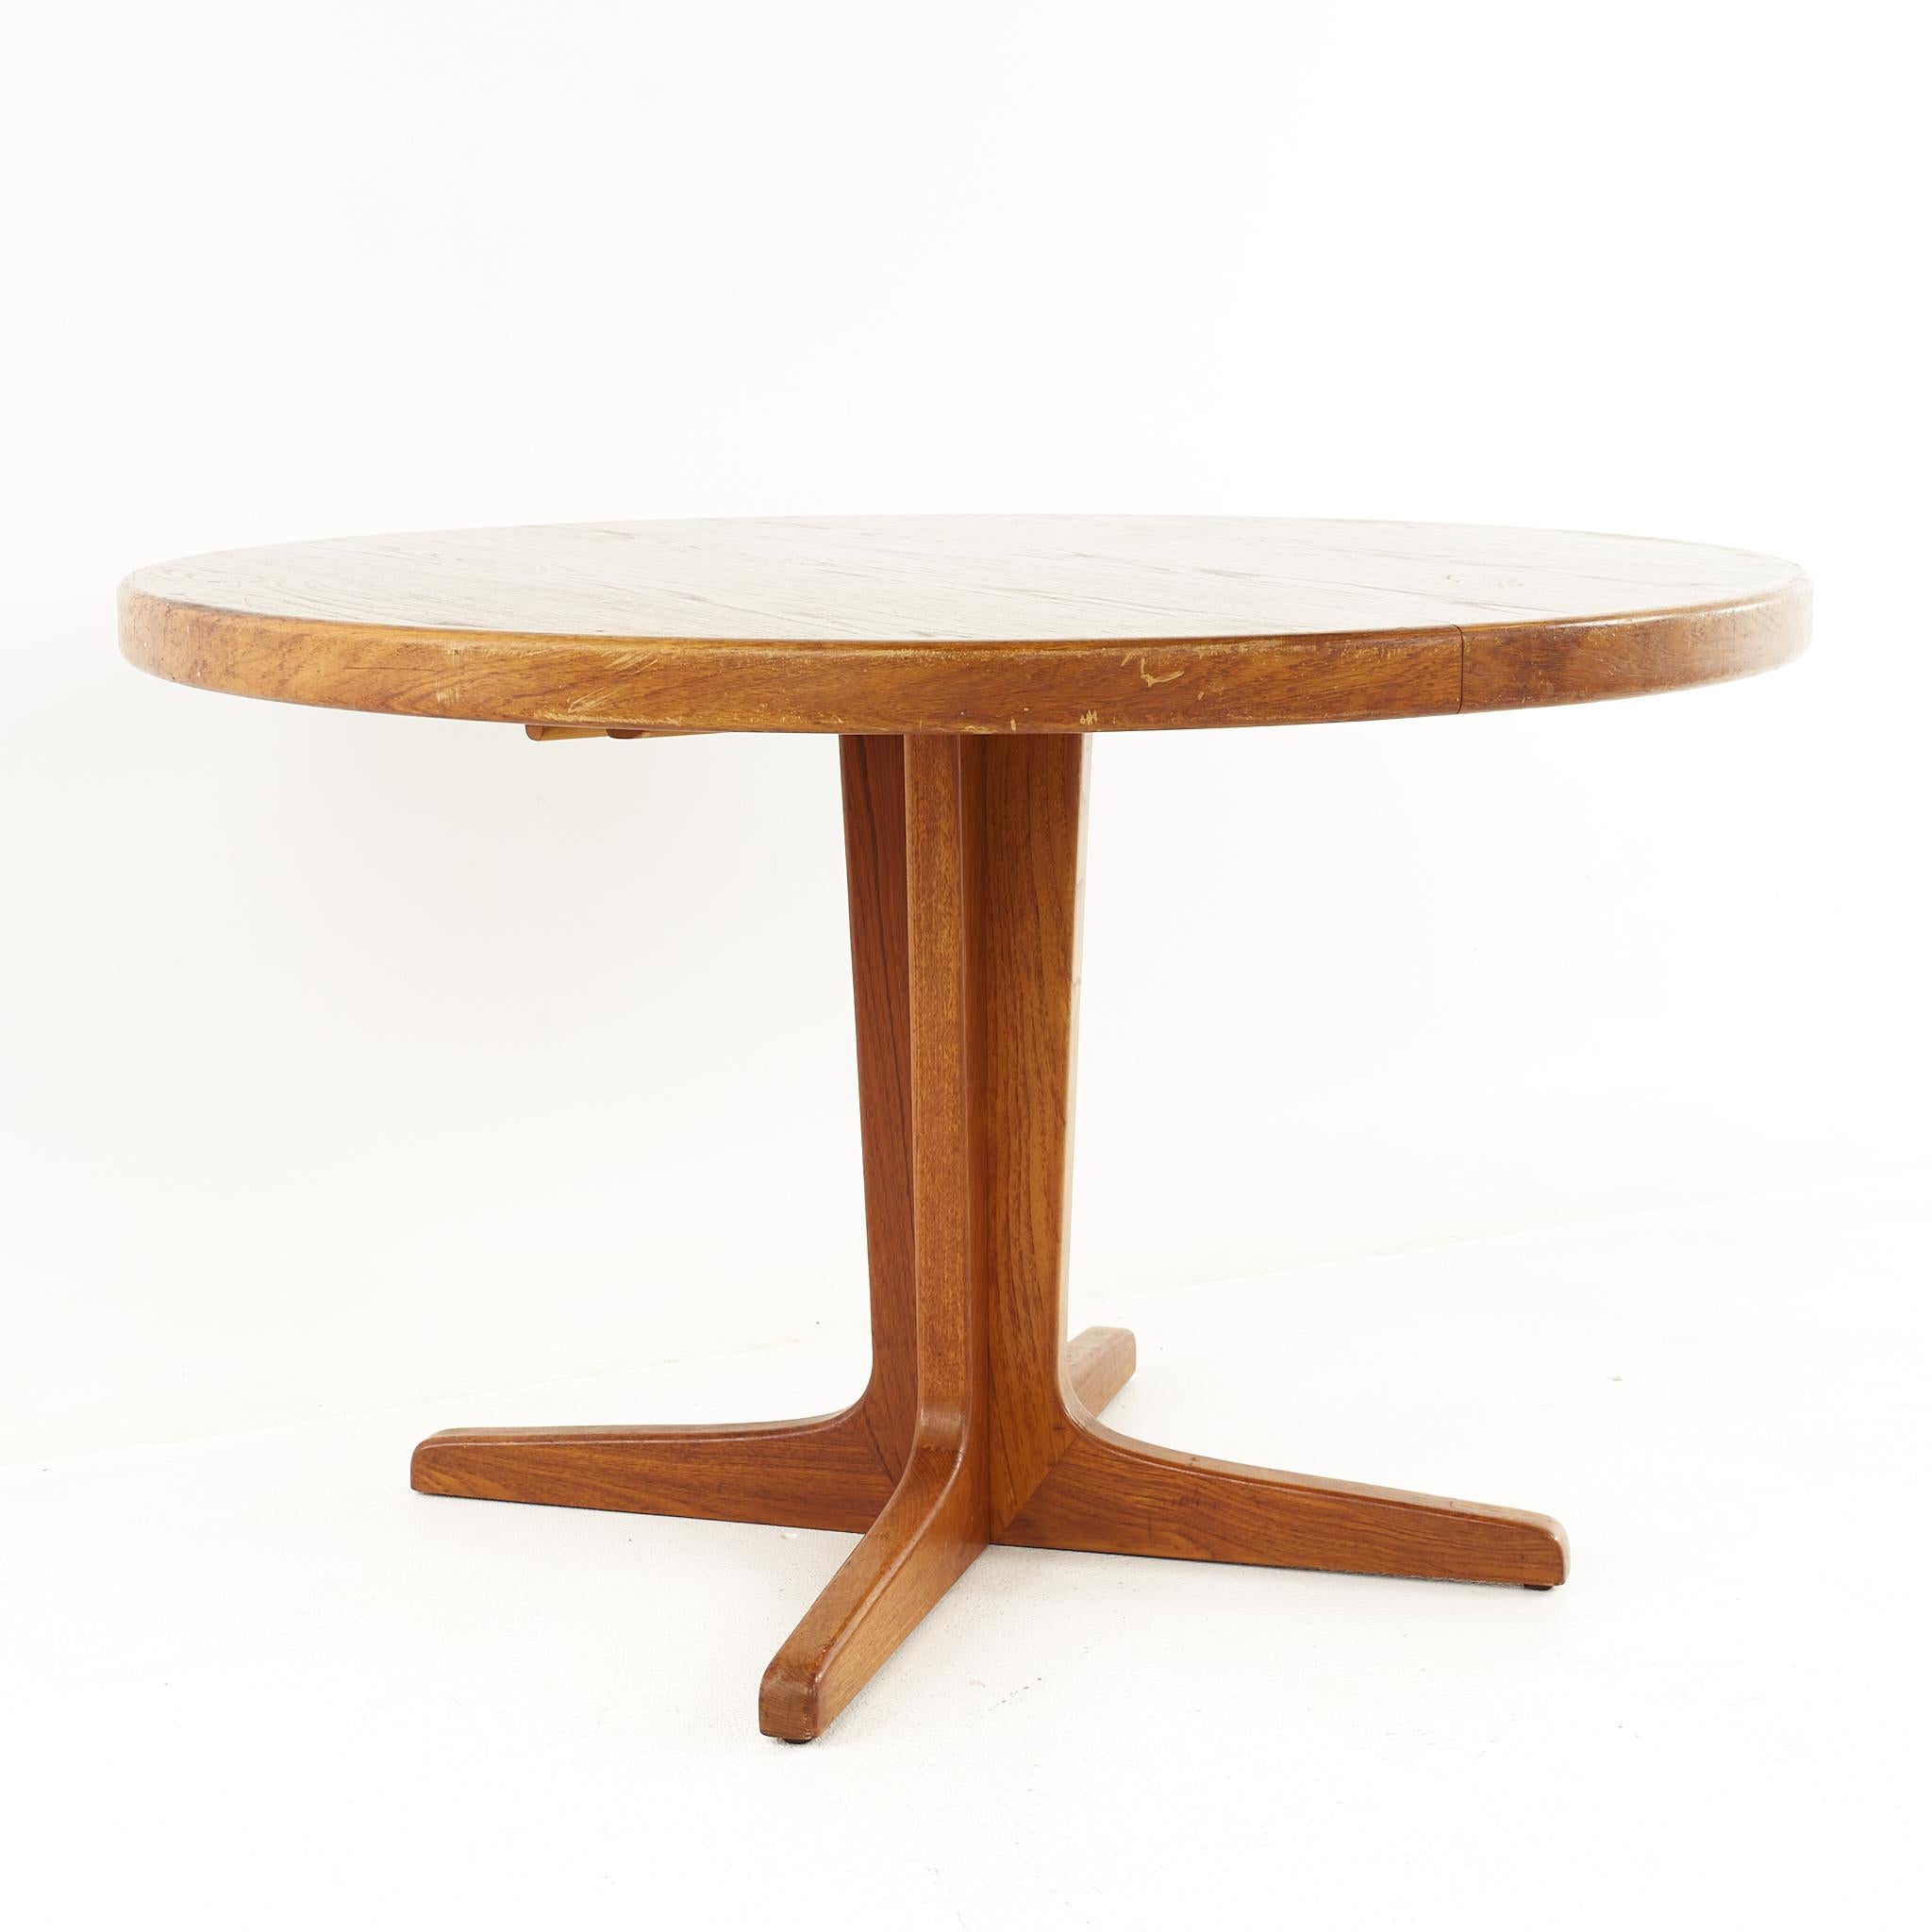 Mid century Danish teak round oval expanding dining table

The table measures: 47 wide x 47 deep x 29 high, with a chair clearance of 26.75 inches; each leaf is 19.75 inches wide, making a maximum table width of 86.5 inches when both leaves are